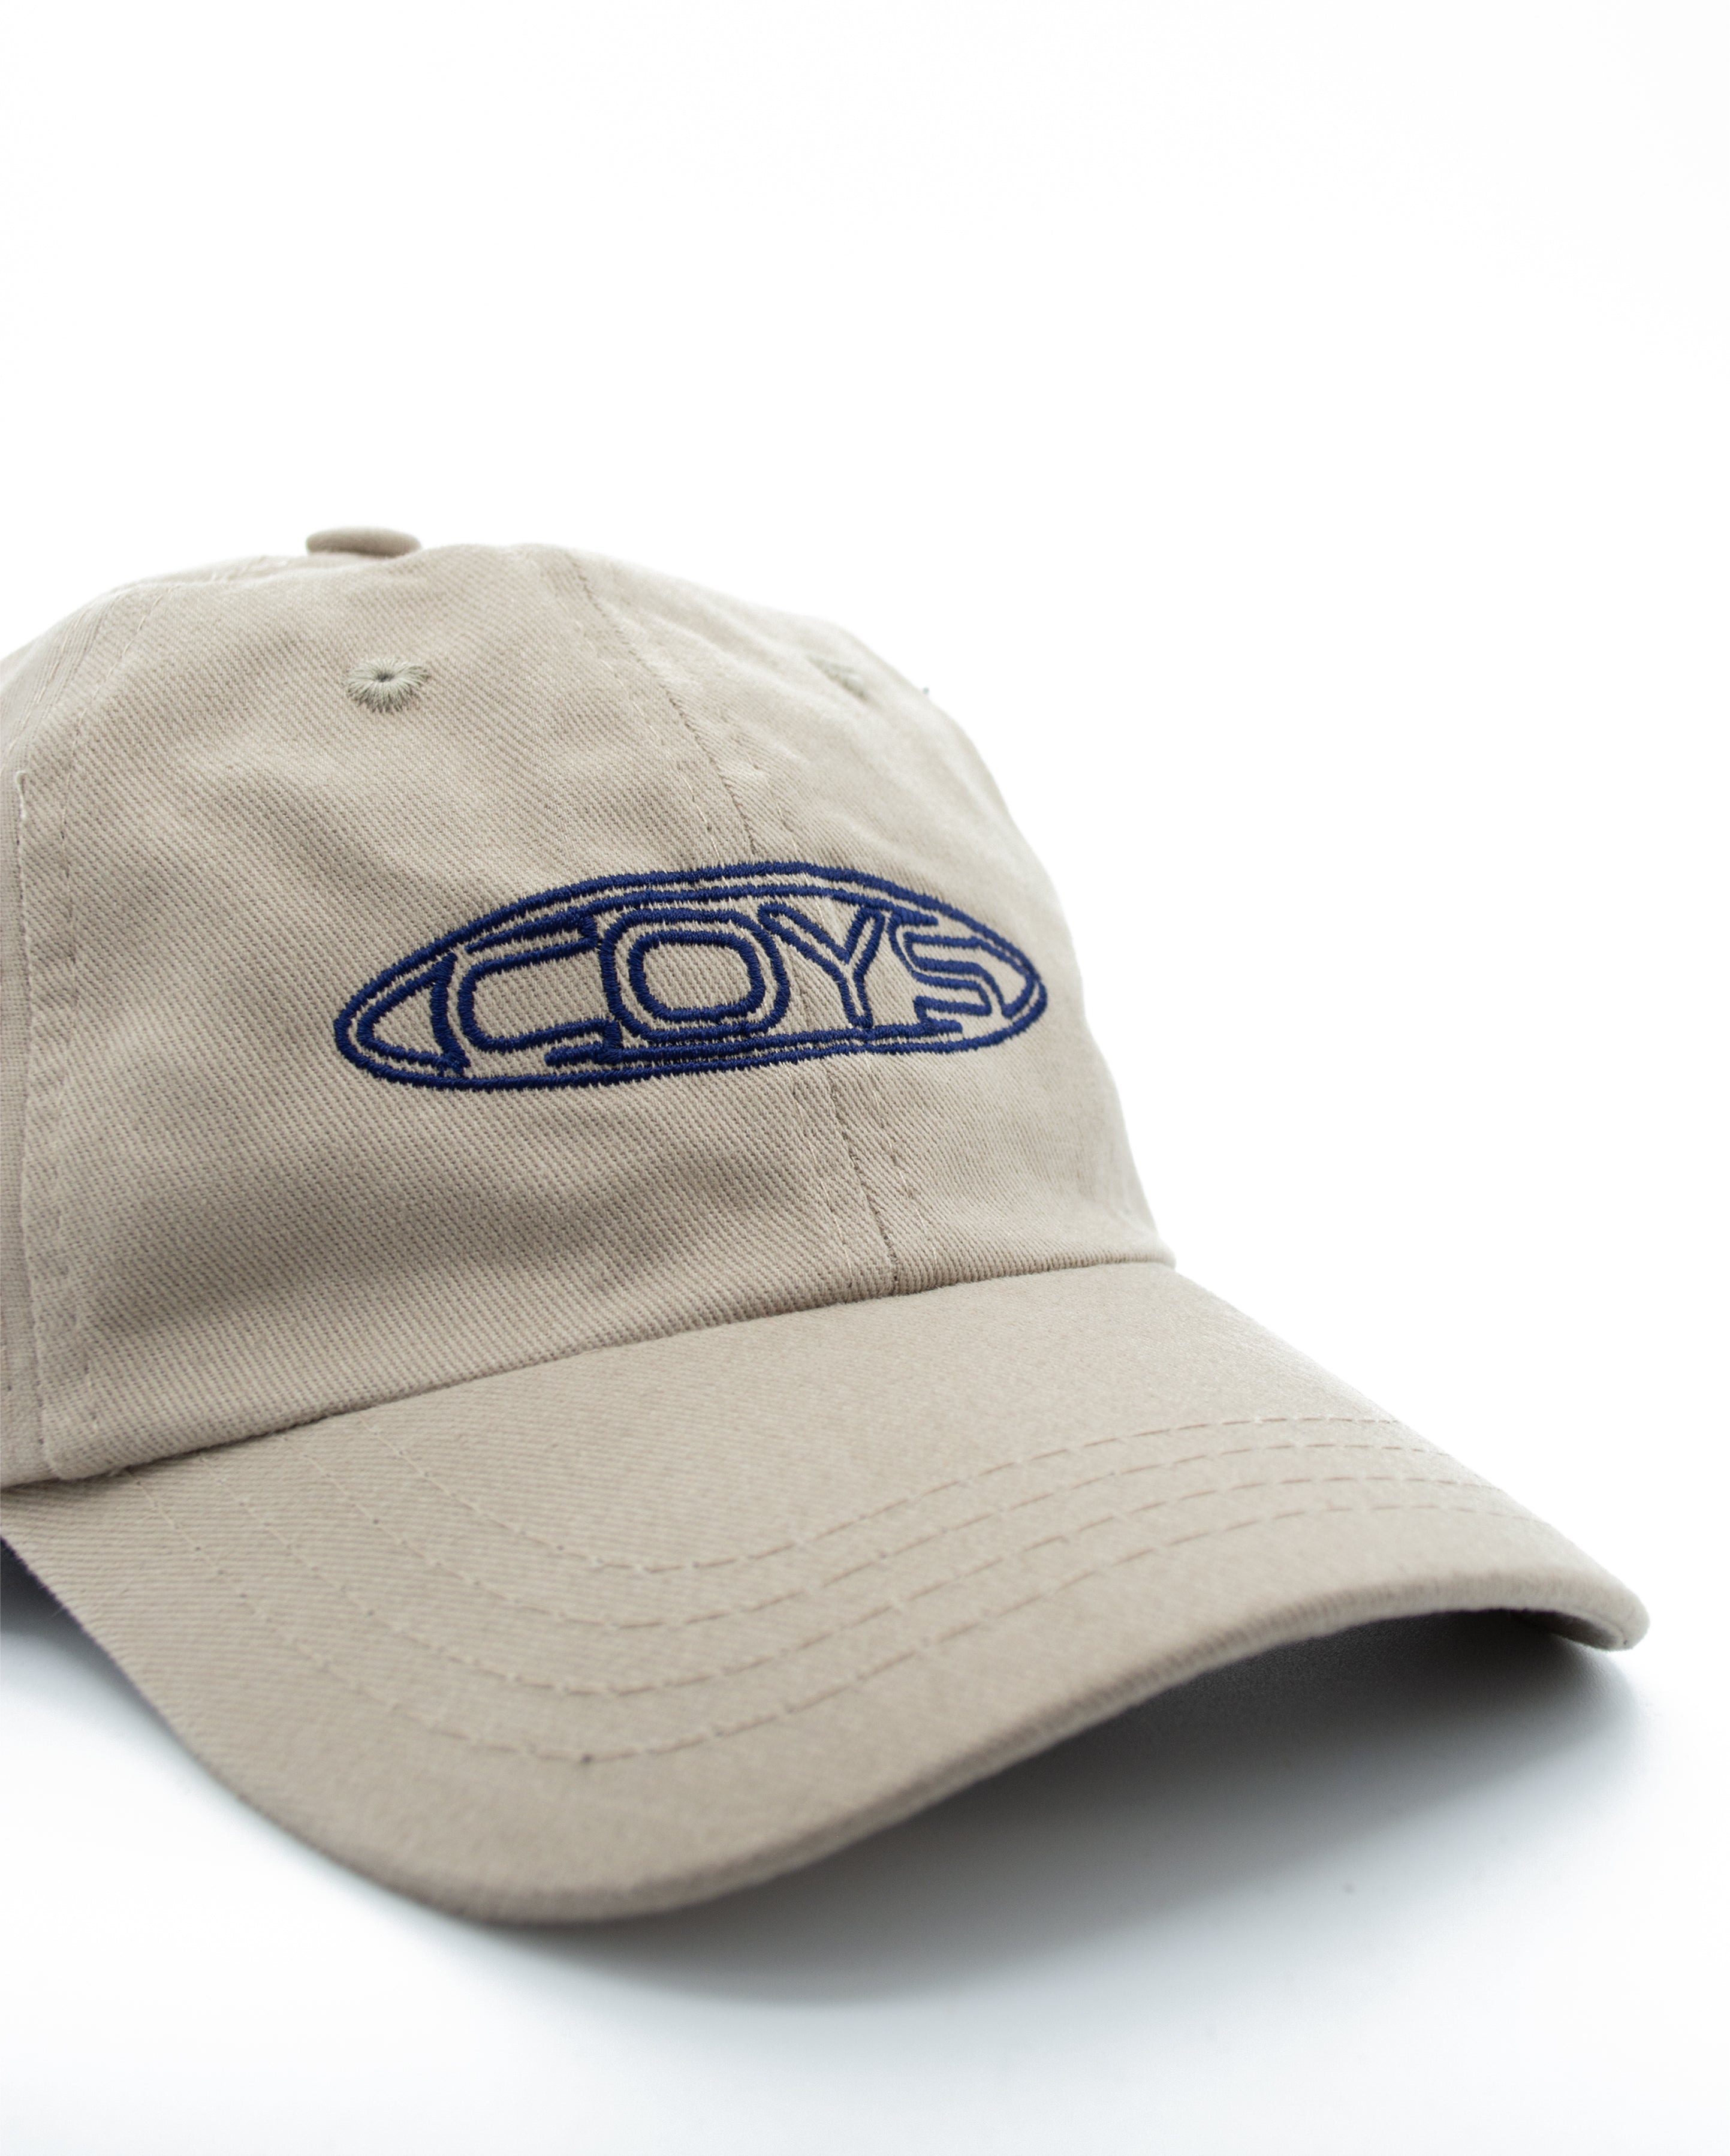 COYS - Embroidered Cap